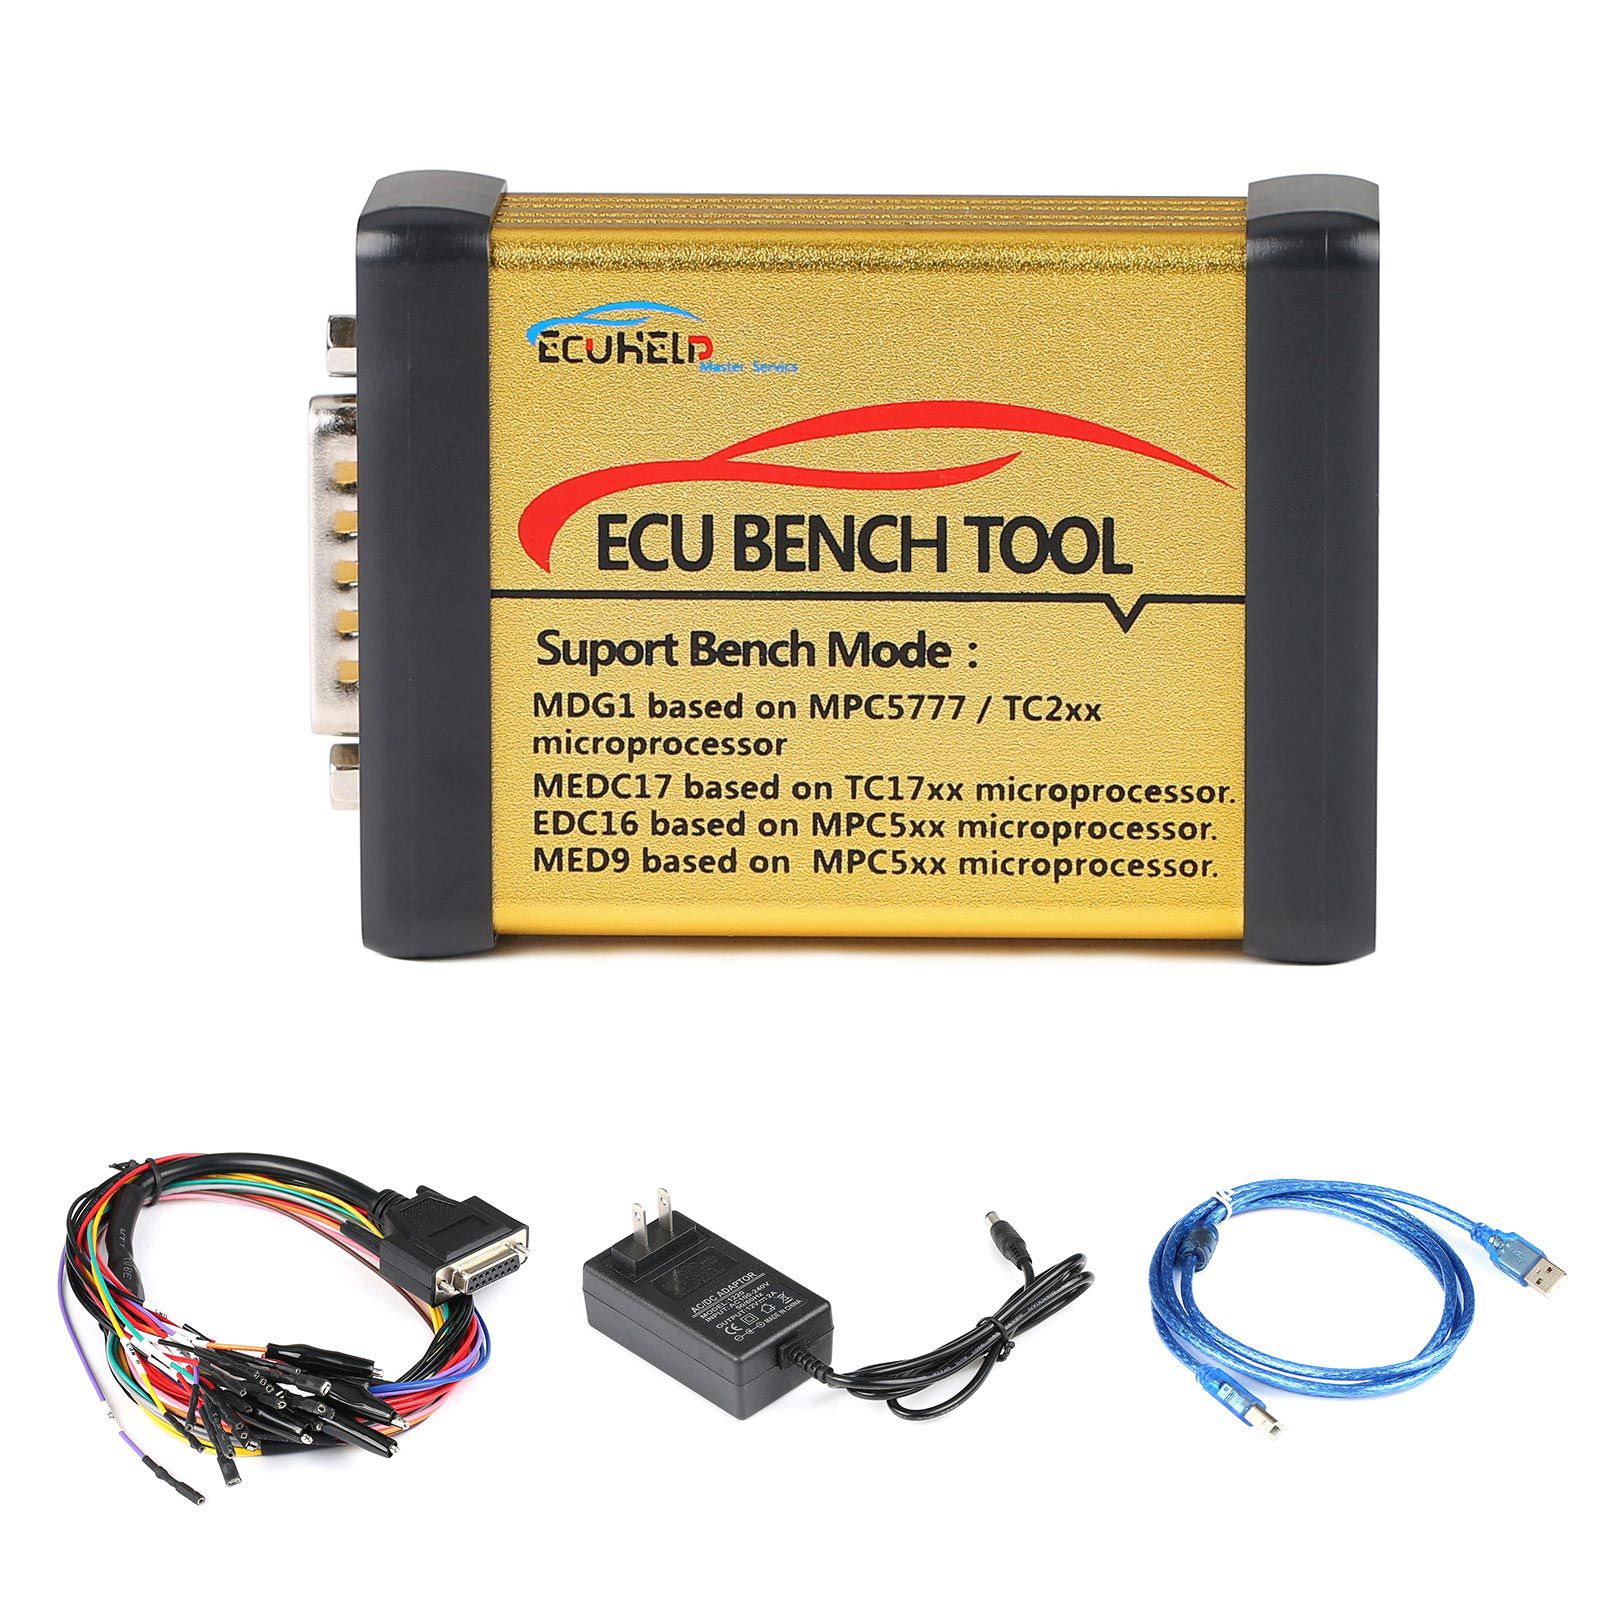 2022 ECUHelp ECU Bench Tool Full Version with License Supports MD1 MG1 EDC16 MED9 No Need Open to Open ECU Free Update Online